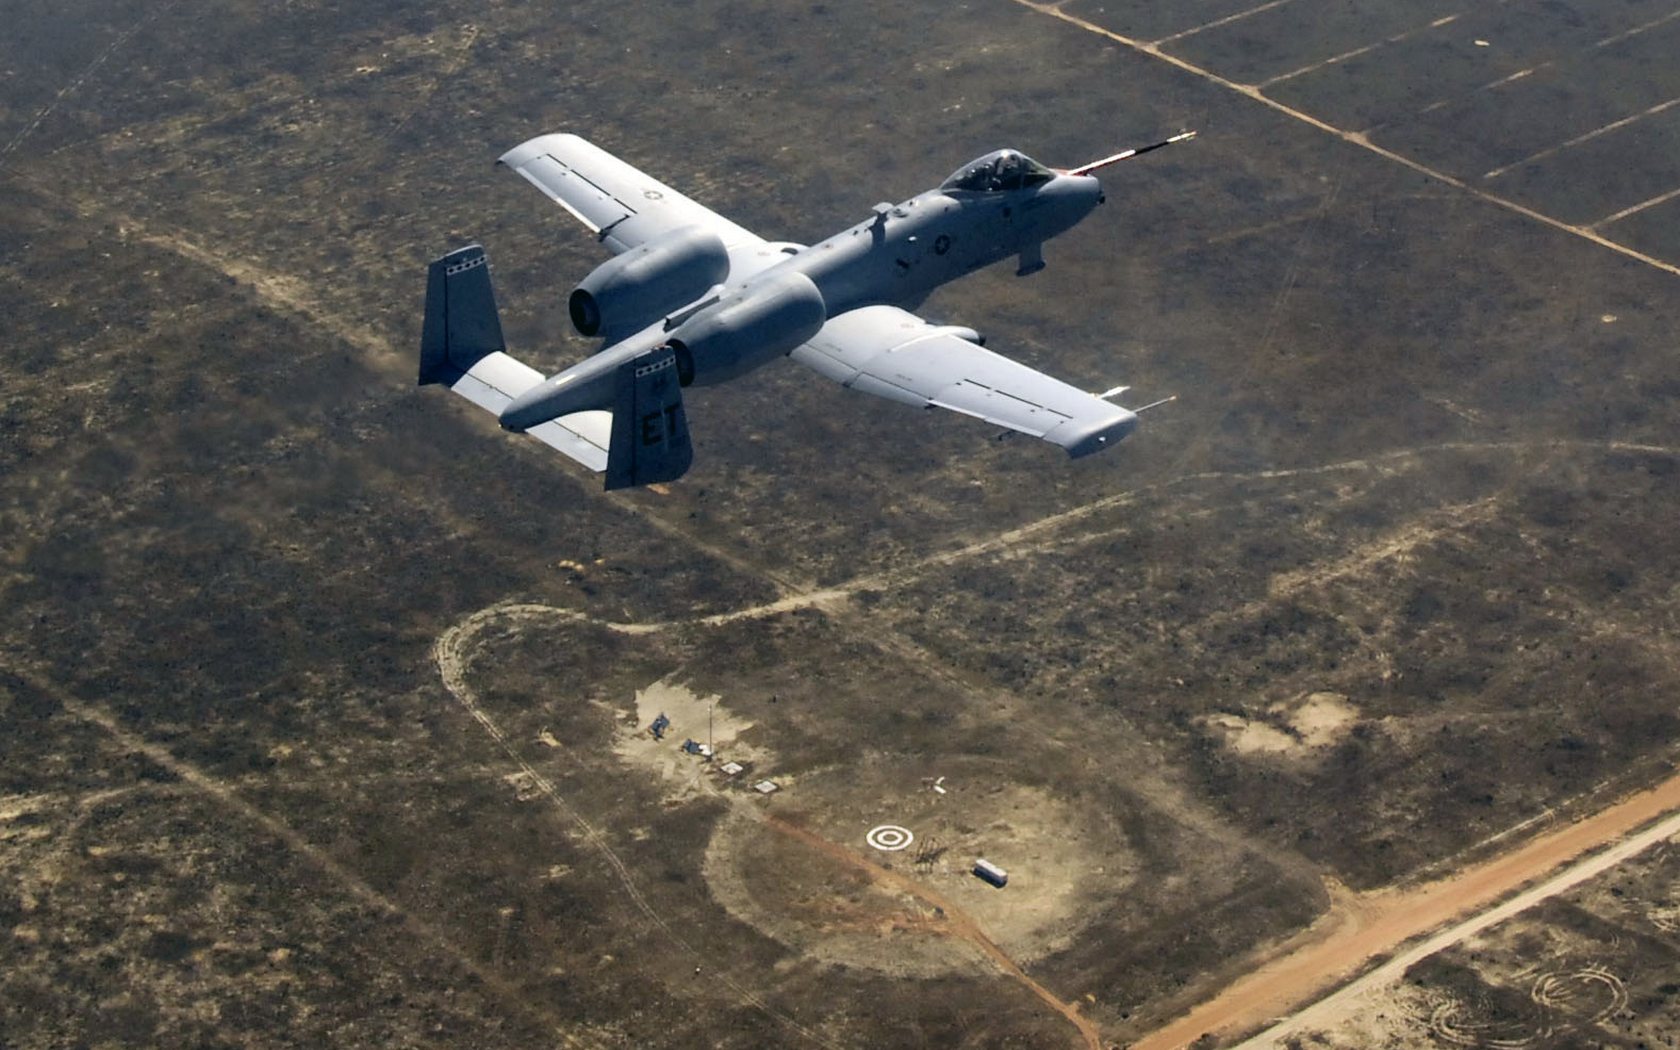 Download HQ A-10 Thunderbolt Military Airplanes wallpaper / 1680x1050